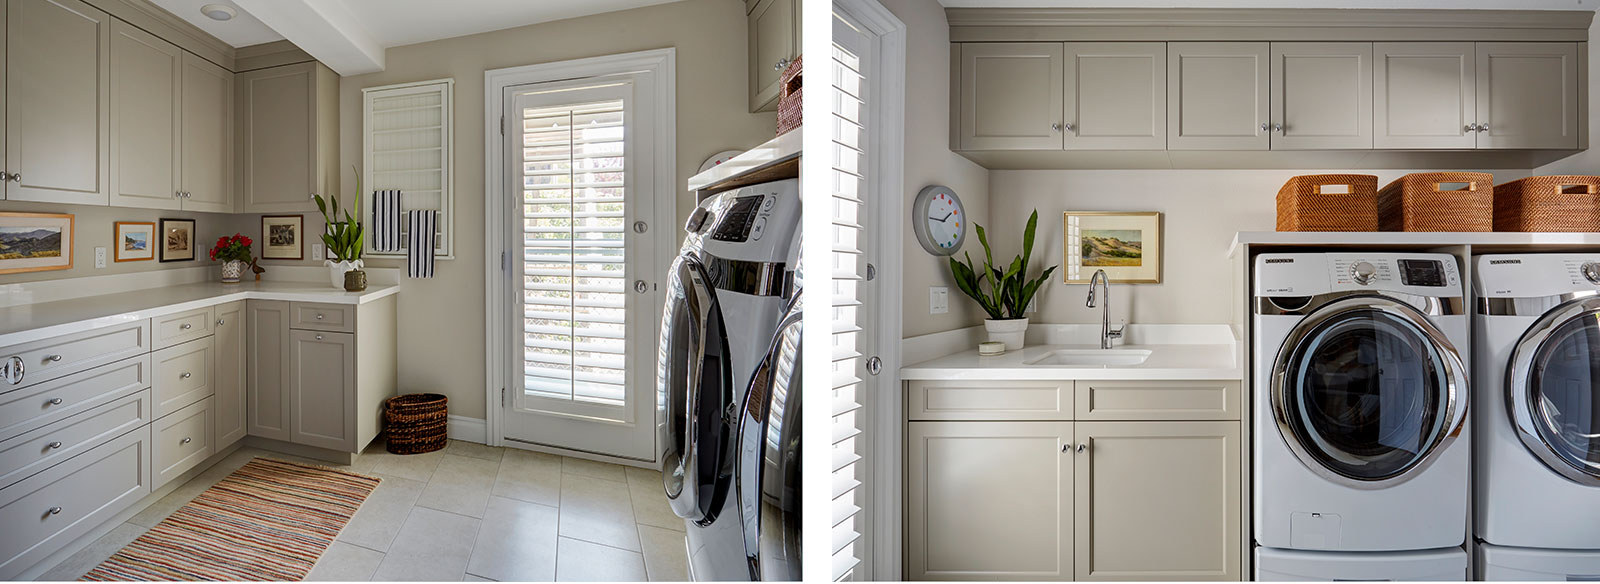  Custom, Clean, and Clever Laundry Room Ideas - Home Remodeling - Harmoni Cabinetry - Custom Kitchens